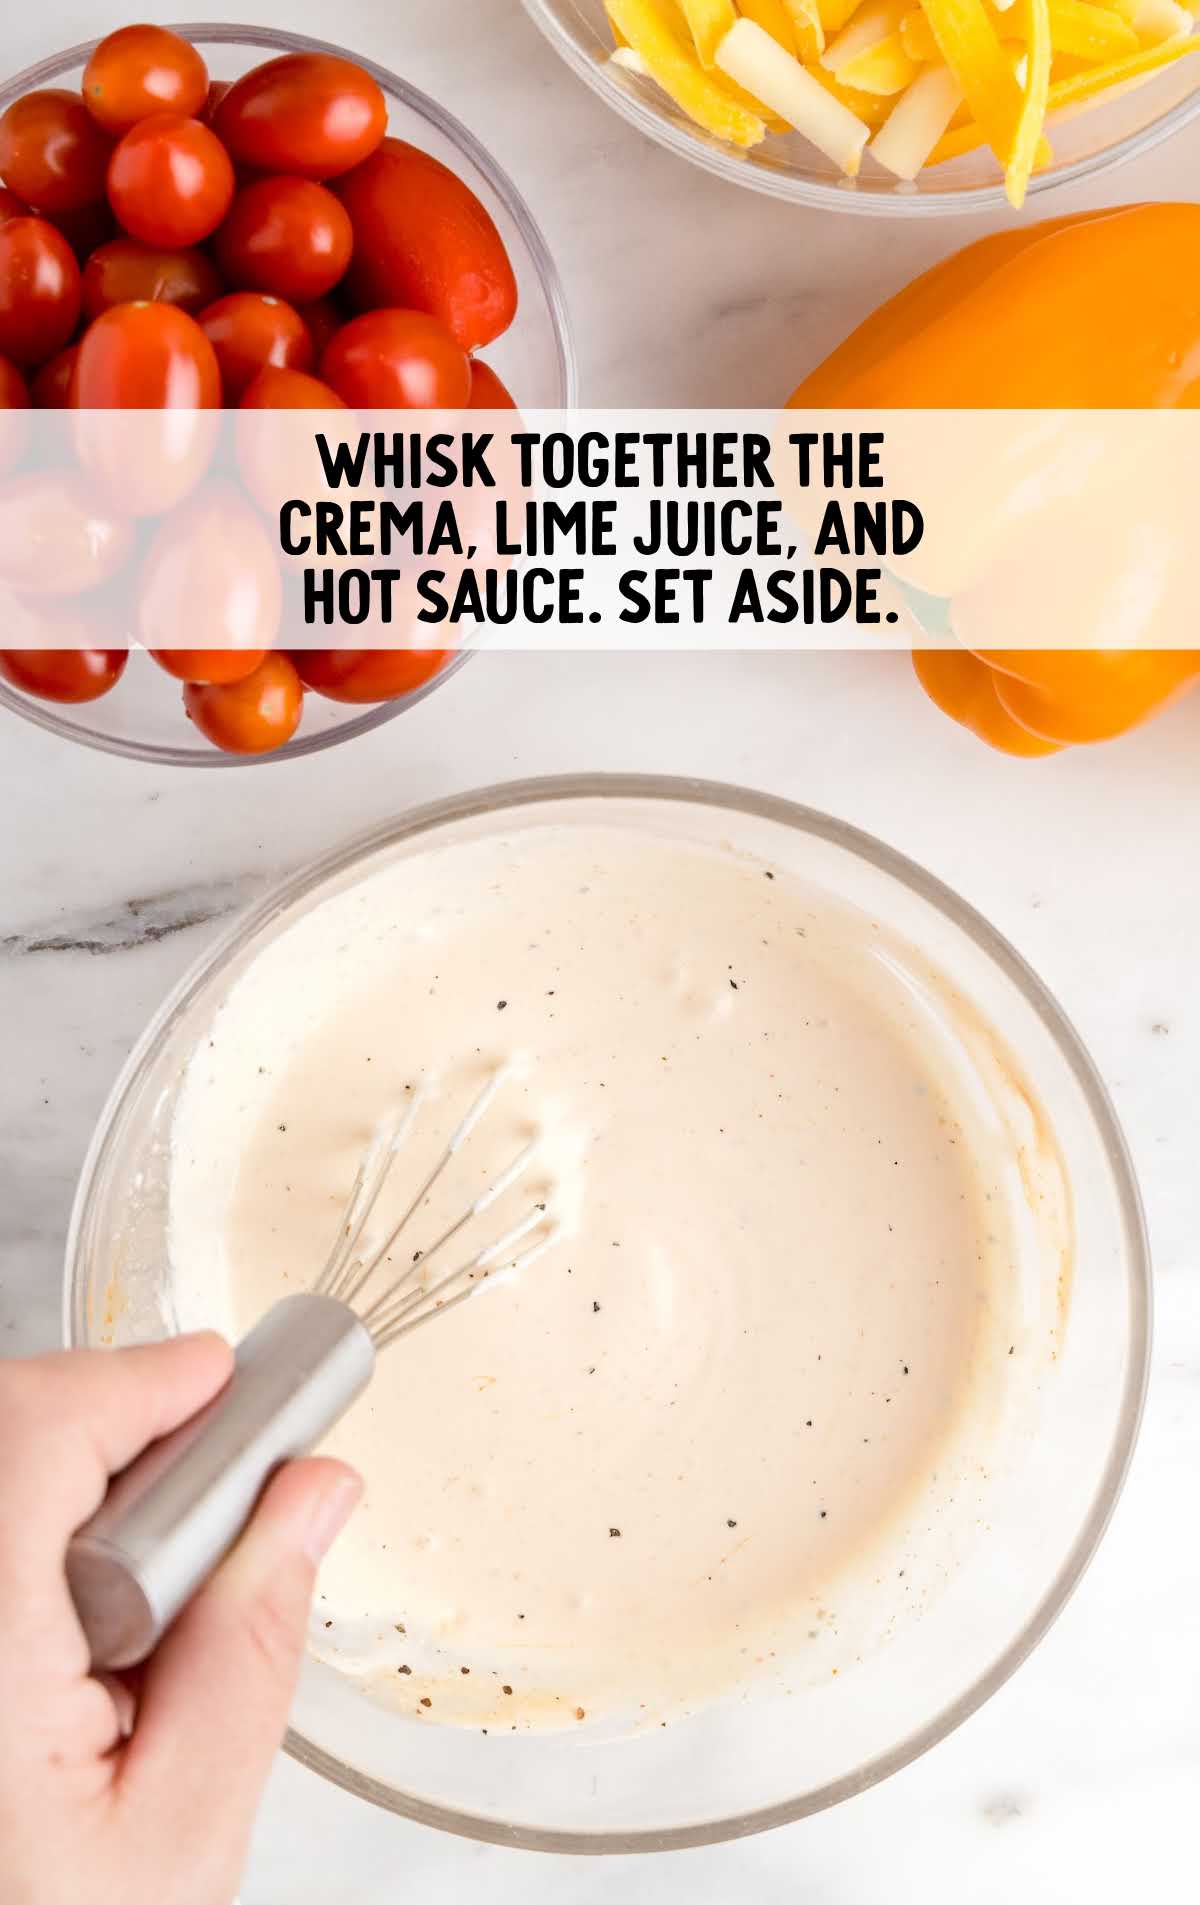 salad dressing ingredients whisked together in a bowl